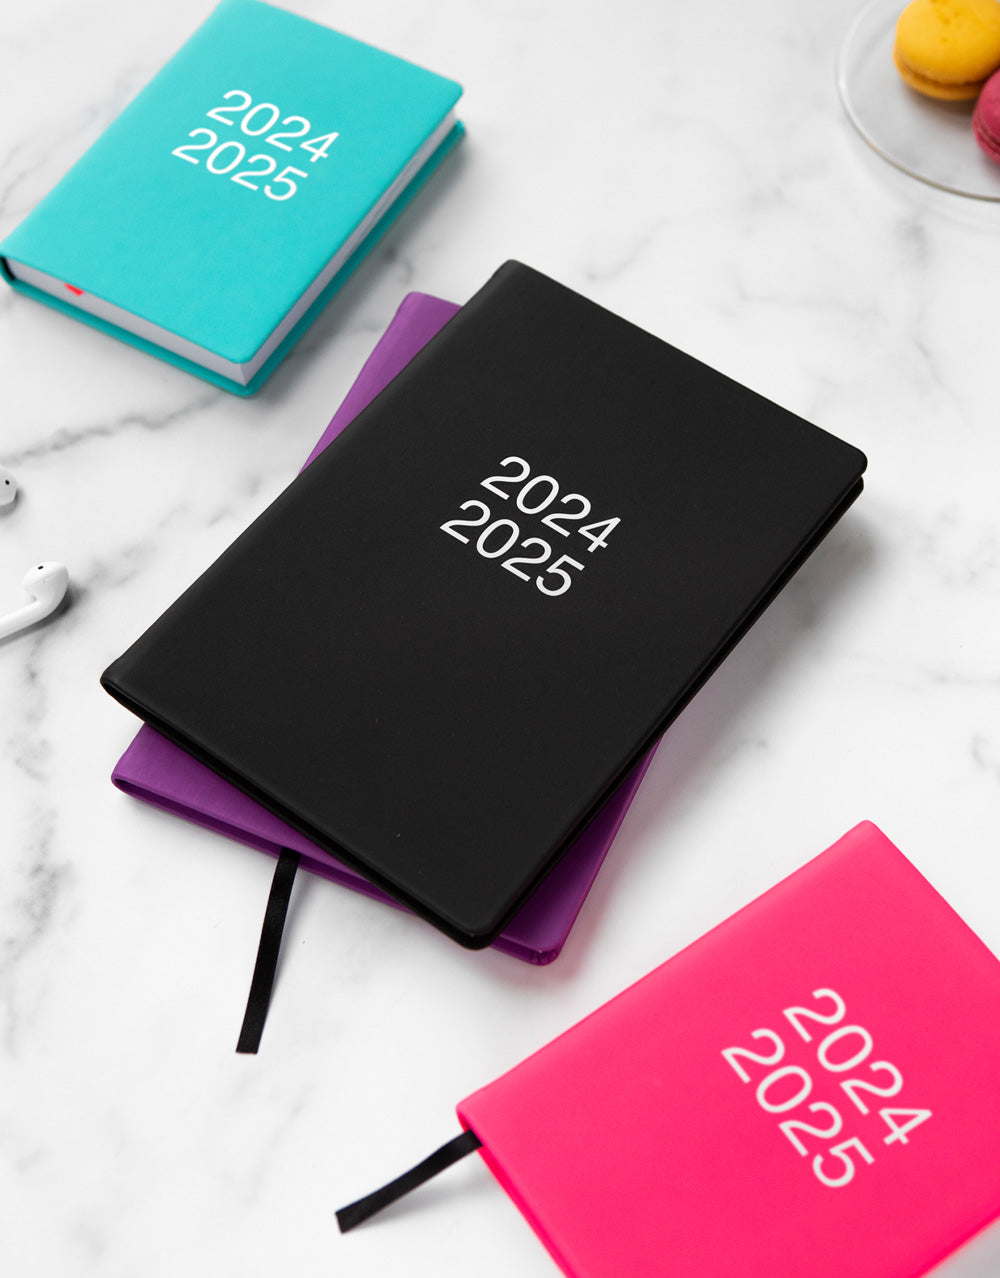 Dazzle A6 Day to a Page Diary with Appointments 2024-2025 - Multilanguage#colour_purple